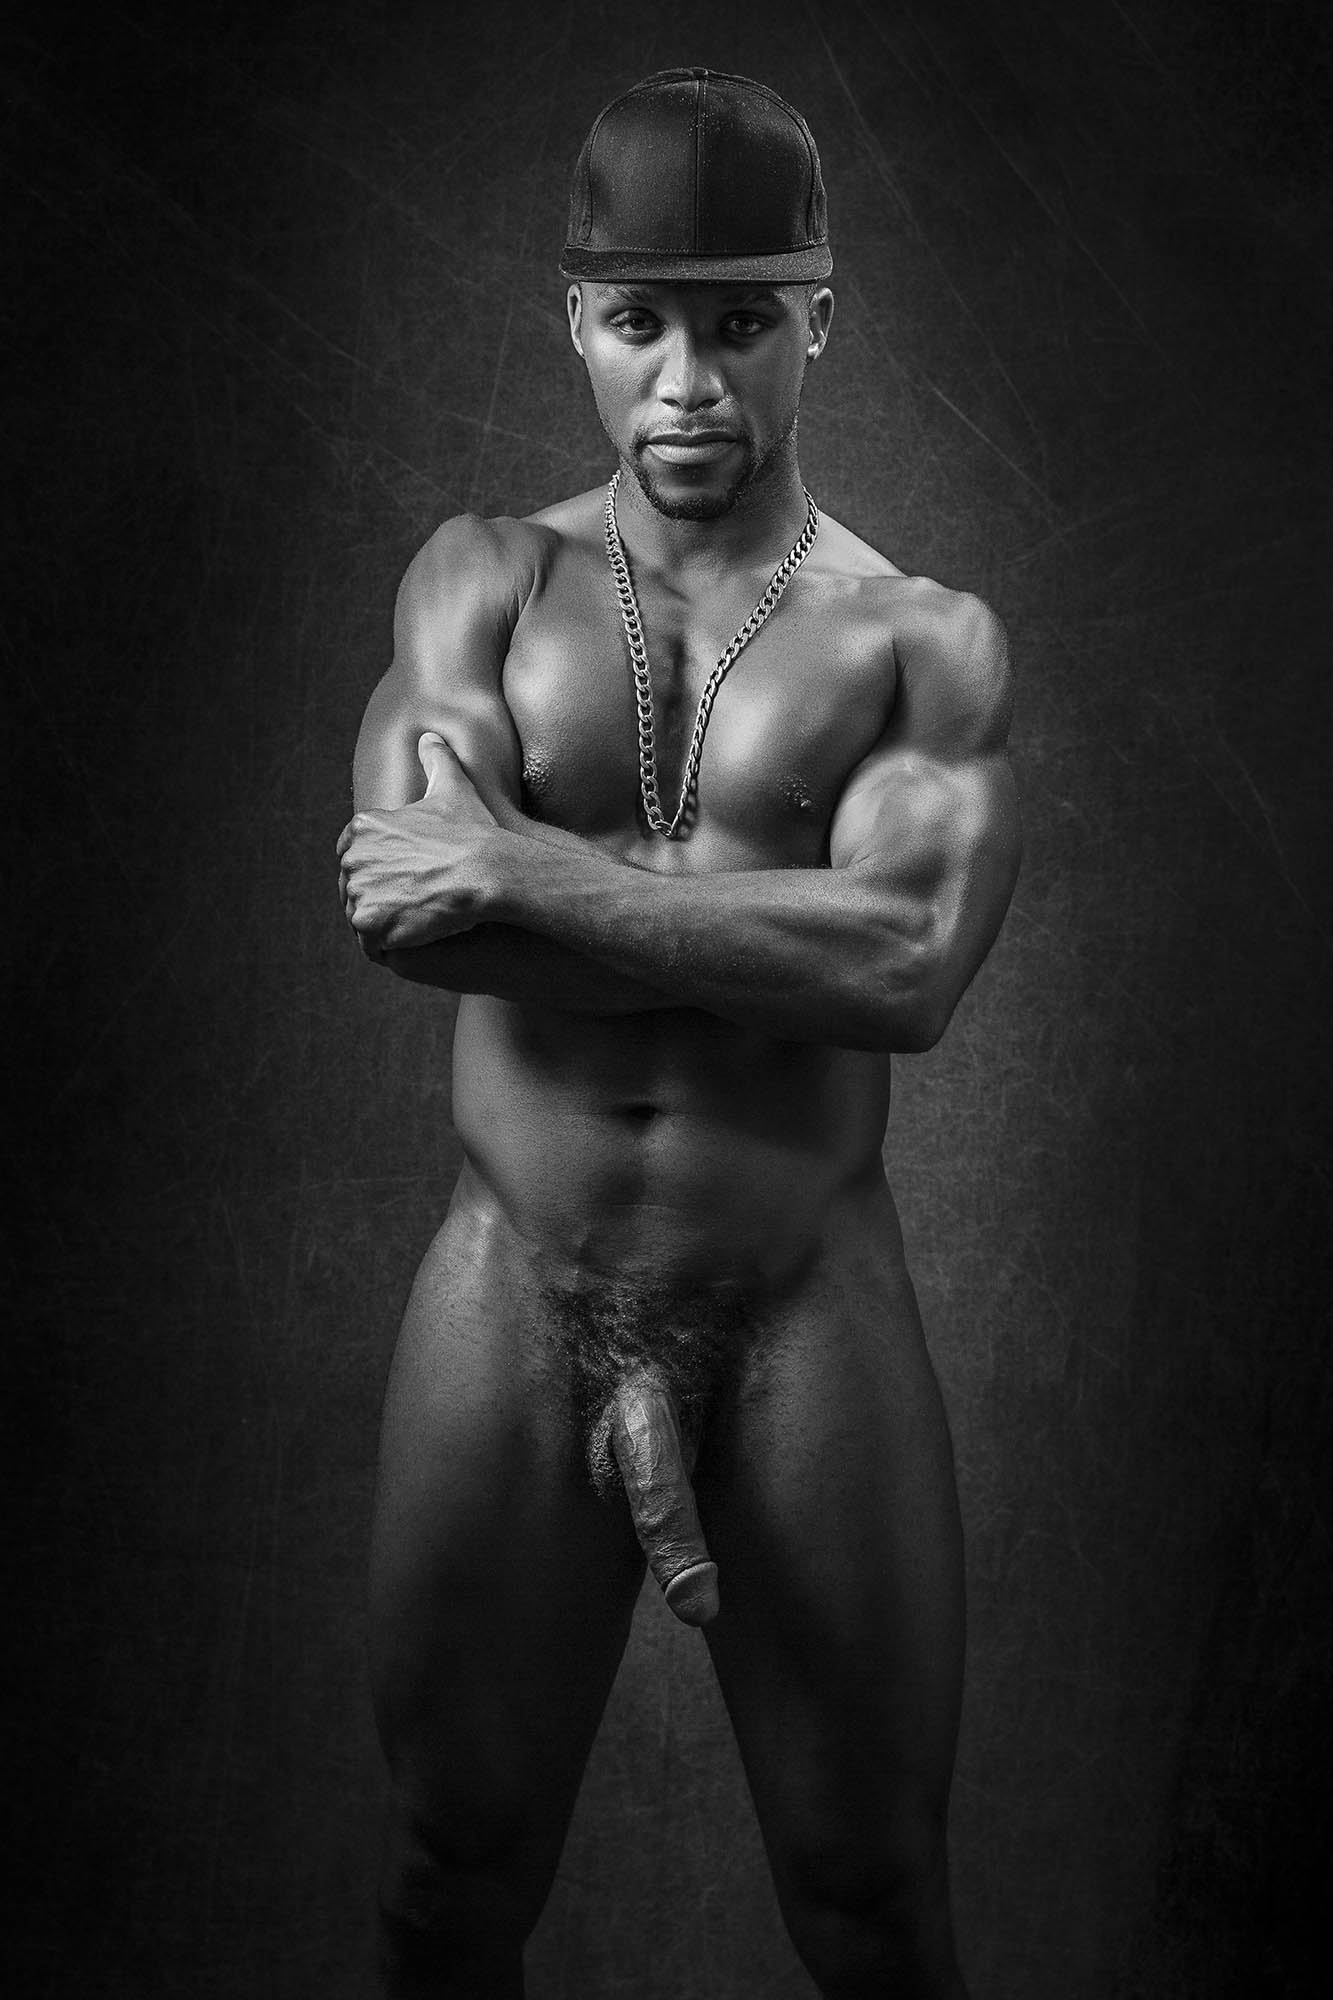 – EXPLICIT CONTENT – «I AM HERE, SIR» – Valton Jackson by New Cross Photo.